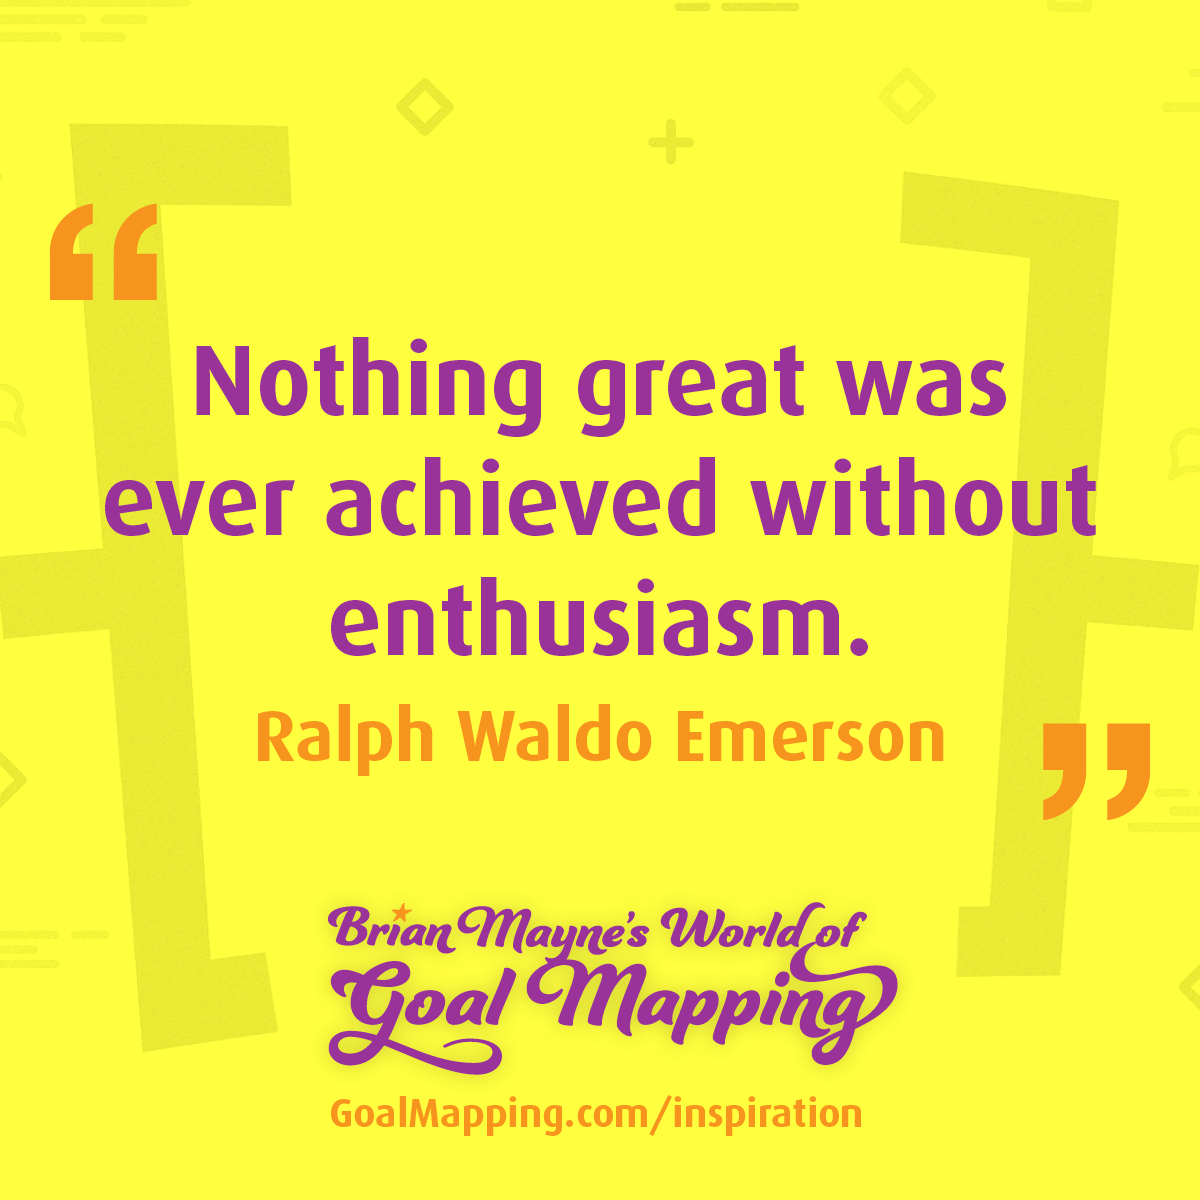 "Nothing great was ever achieved without enthusiasm." Ralph Waldo Emerson